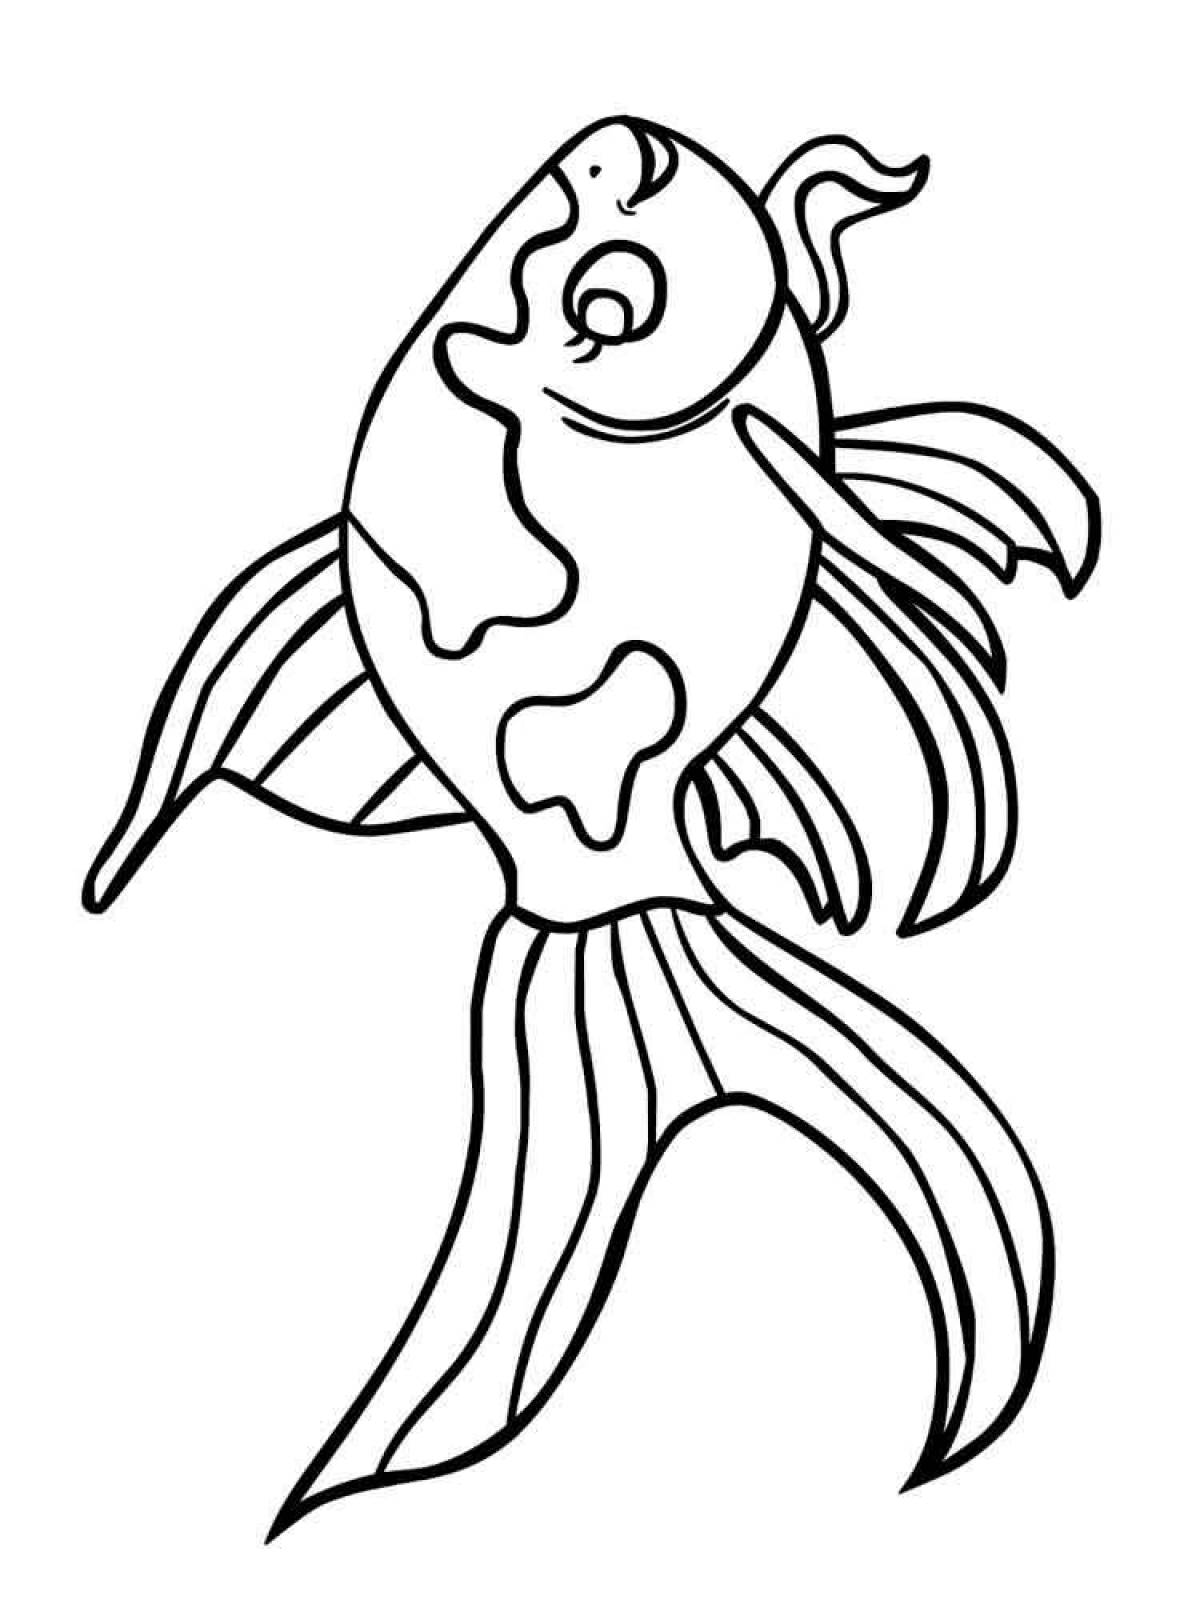 Amazing goldfish coloring pages for kids